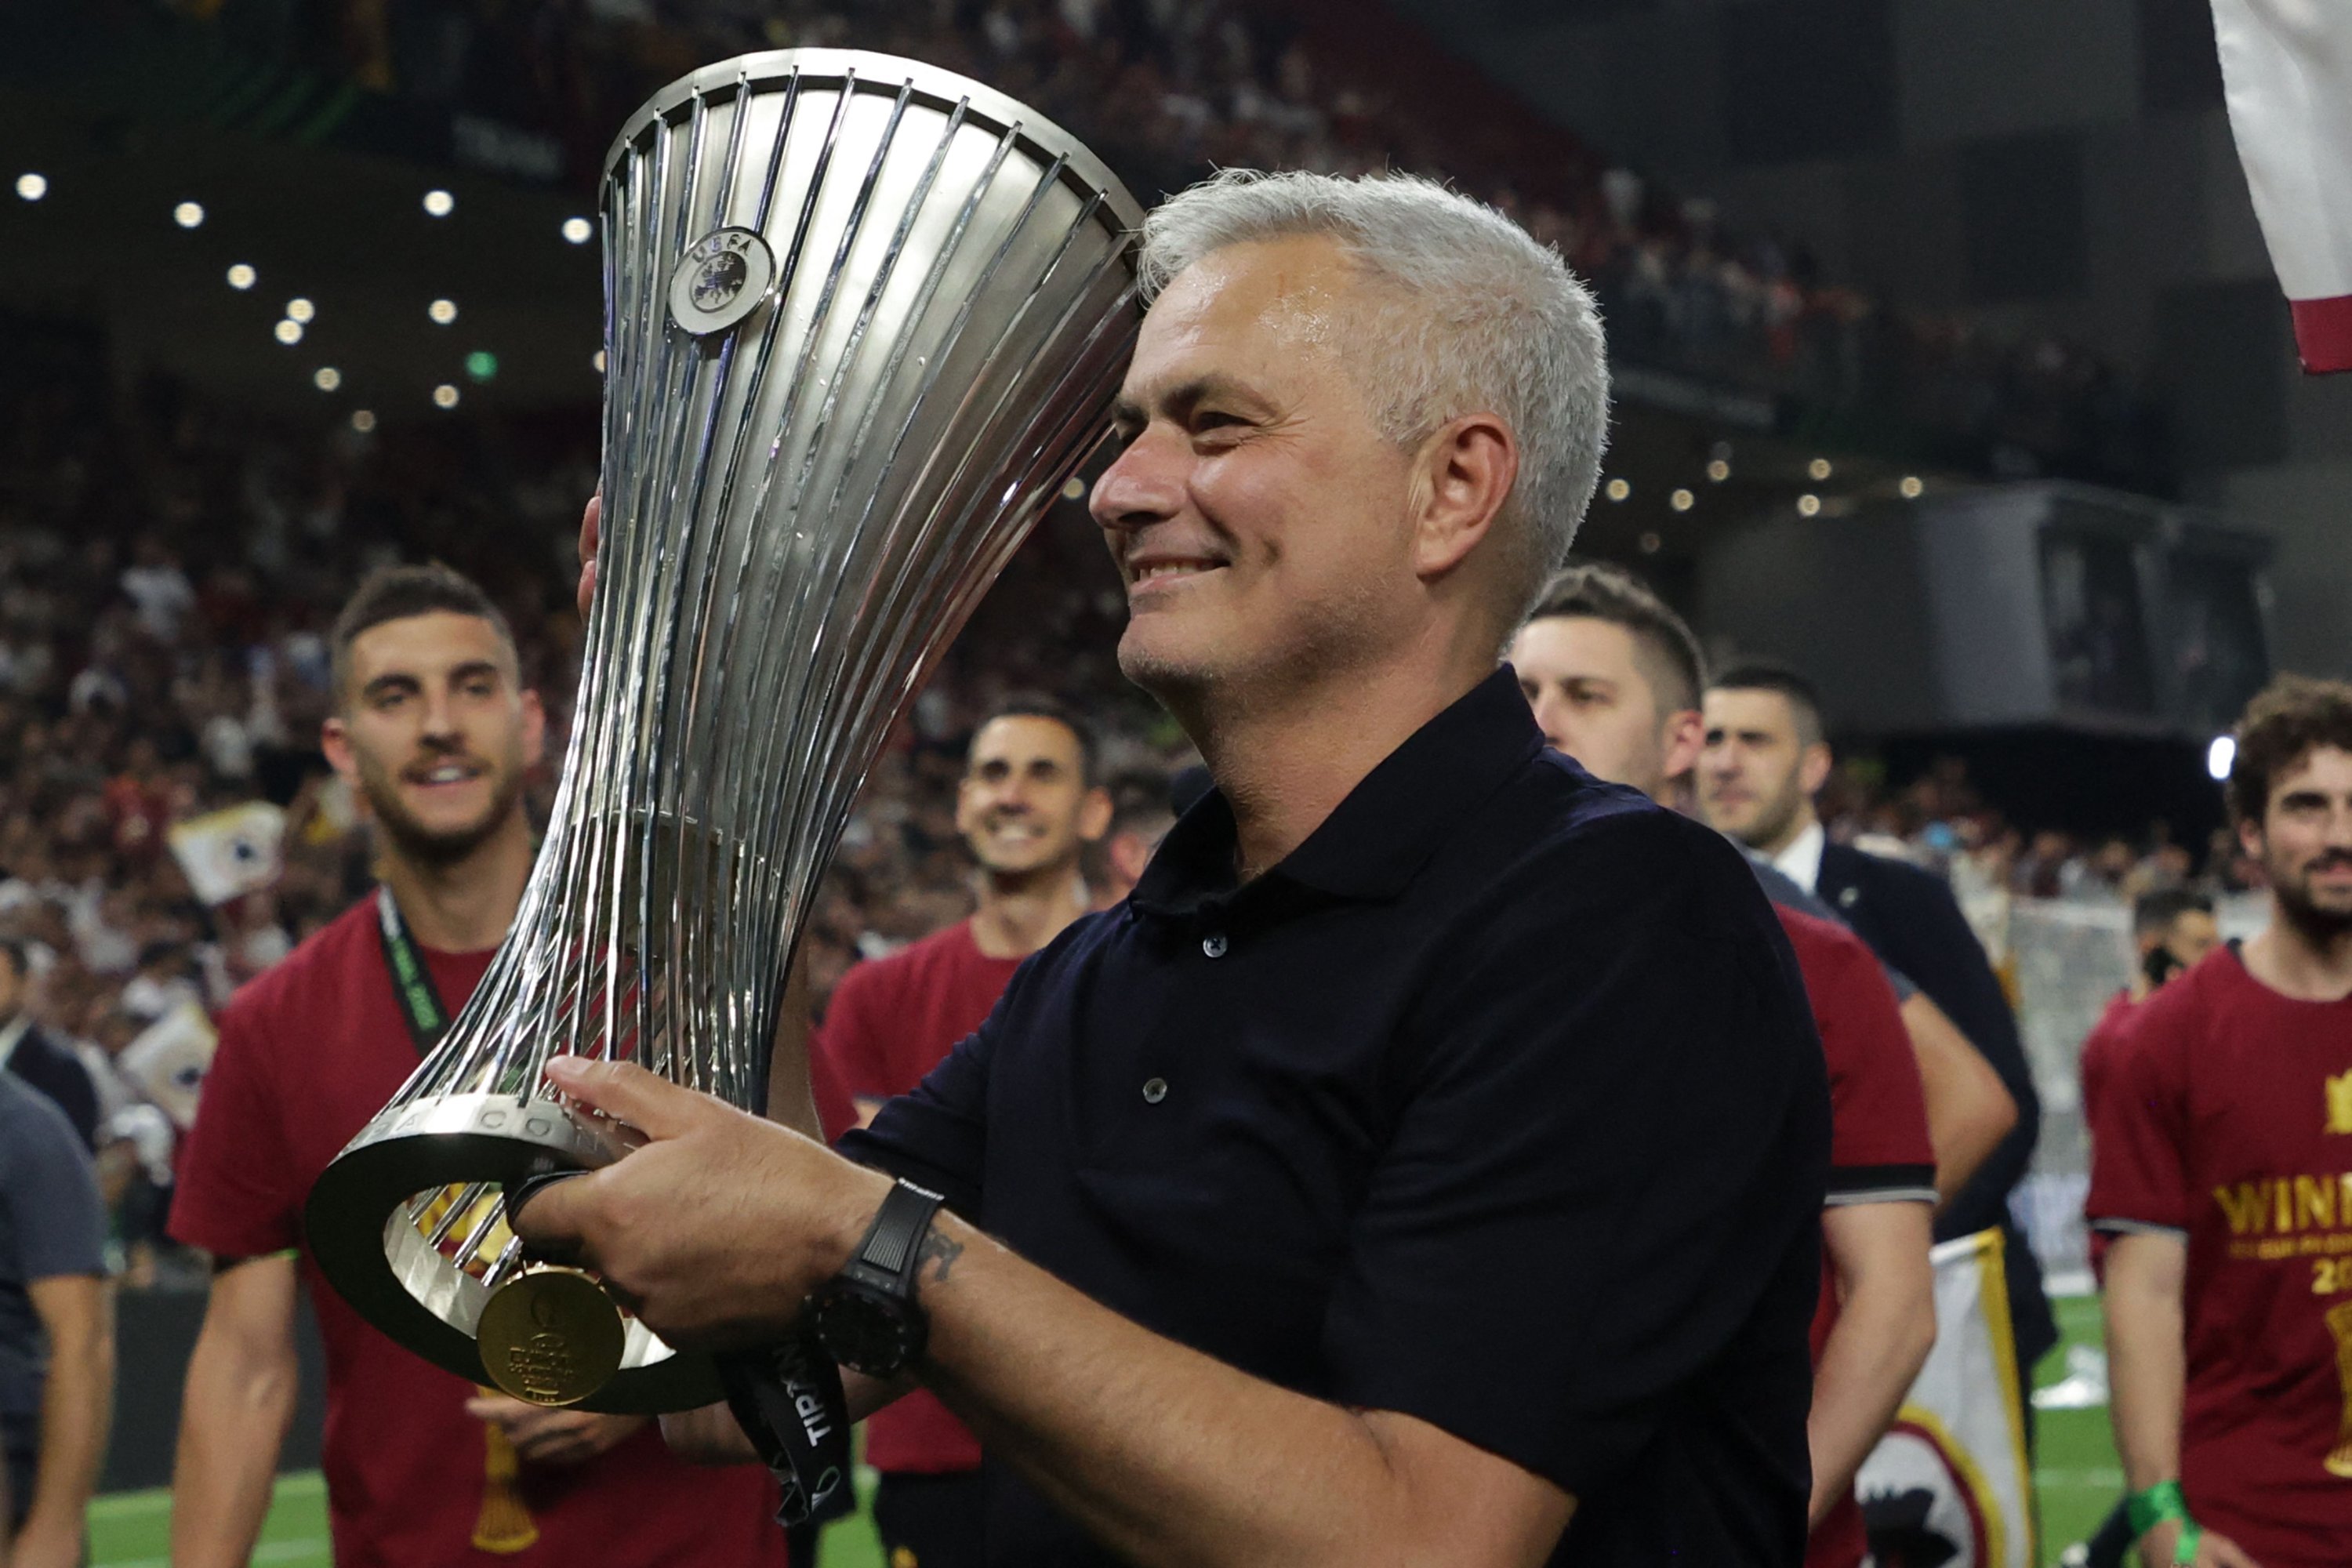 Roma coach Jose Mourinho with the trophy after winning the Europa Conference League final, Tirana, Albania, May 25, 2022. (AFP Photo)